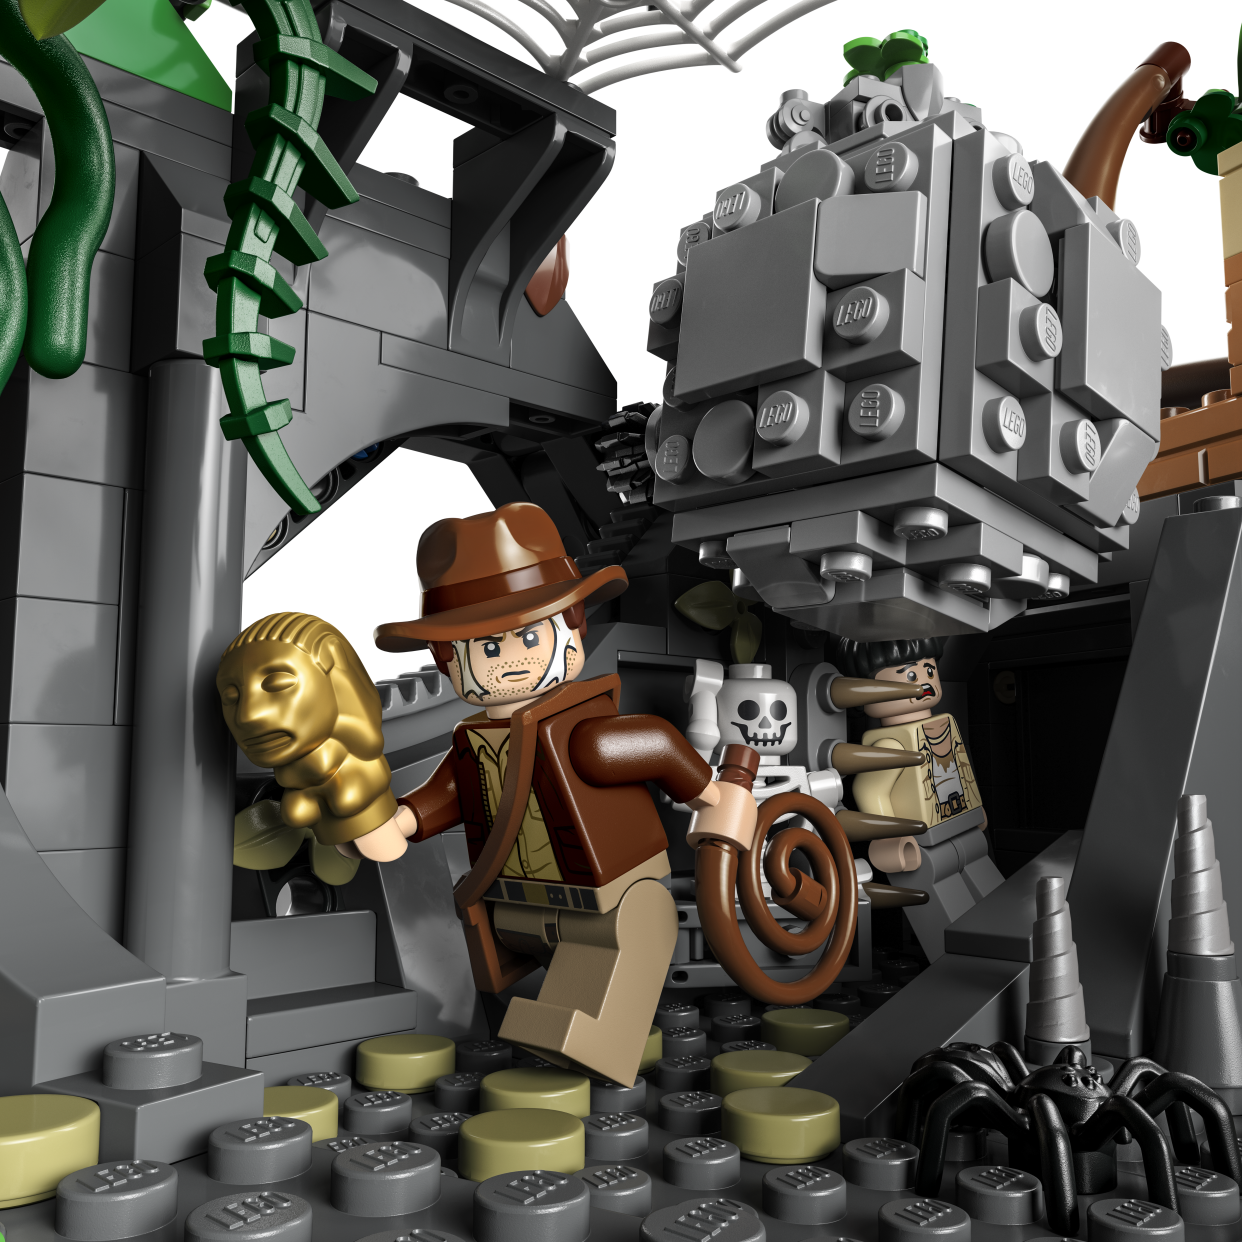 Outrun a brick boulder in Lego's Indiana Jones Temple of the Golden Idol playset. (Photo: Courtesy of Lego)